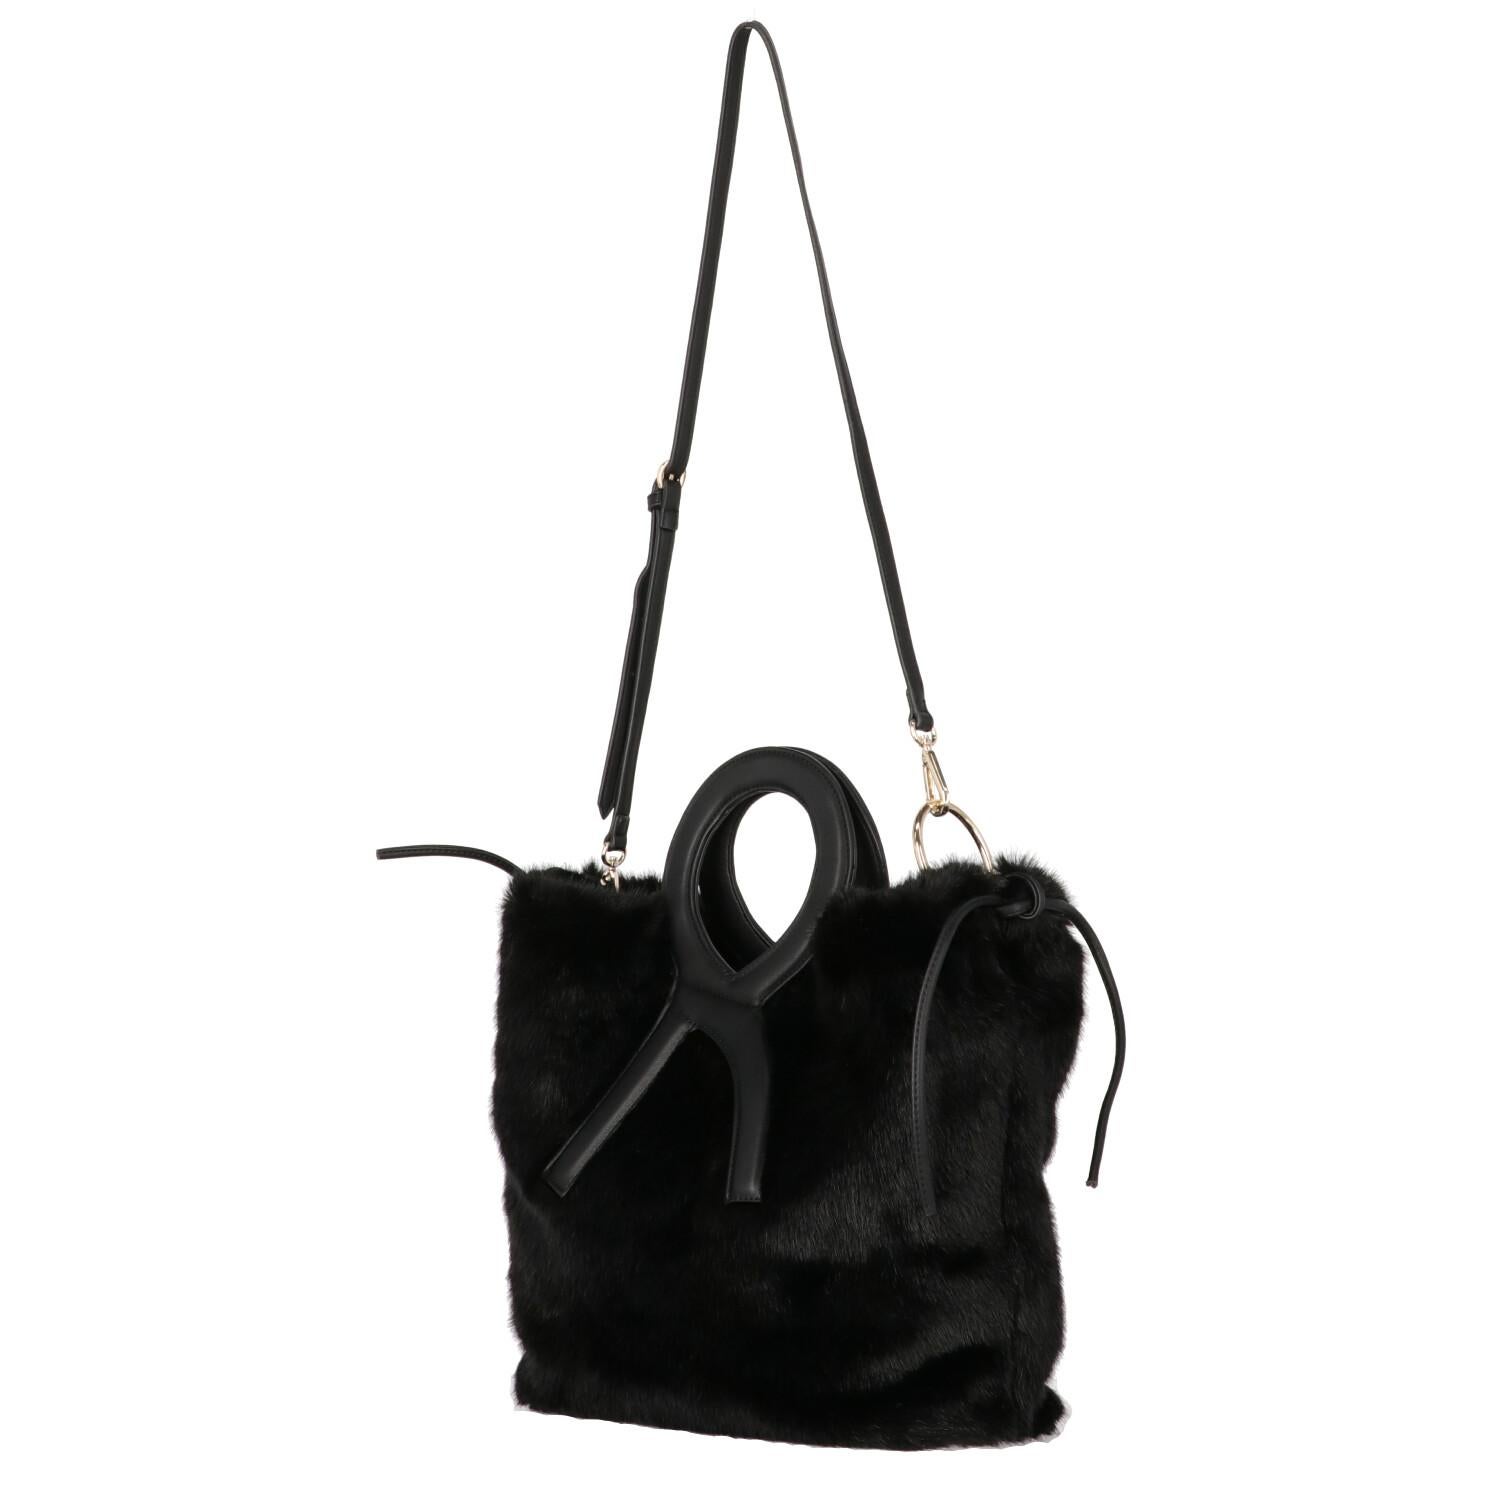 A.N.G.E.L.O. Vintage - ITALY
Roberta Di Camerino black fake fur tote bag. Model with double leather handles, adjustable shoulder strap, golden metal details and magnetic button closure.
Years: 2000s

Made in Italy

Flat measurements

Height: 33